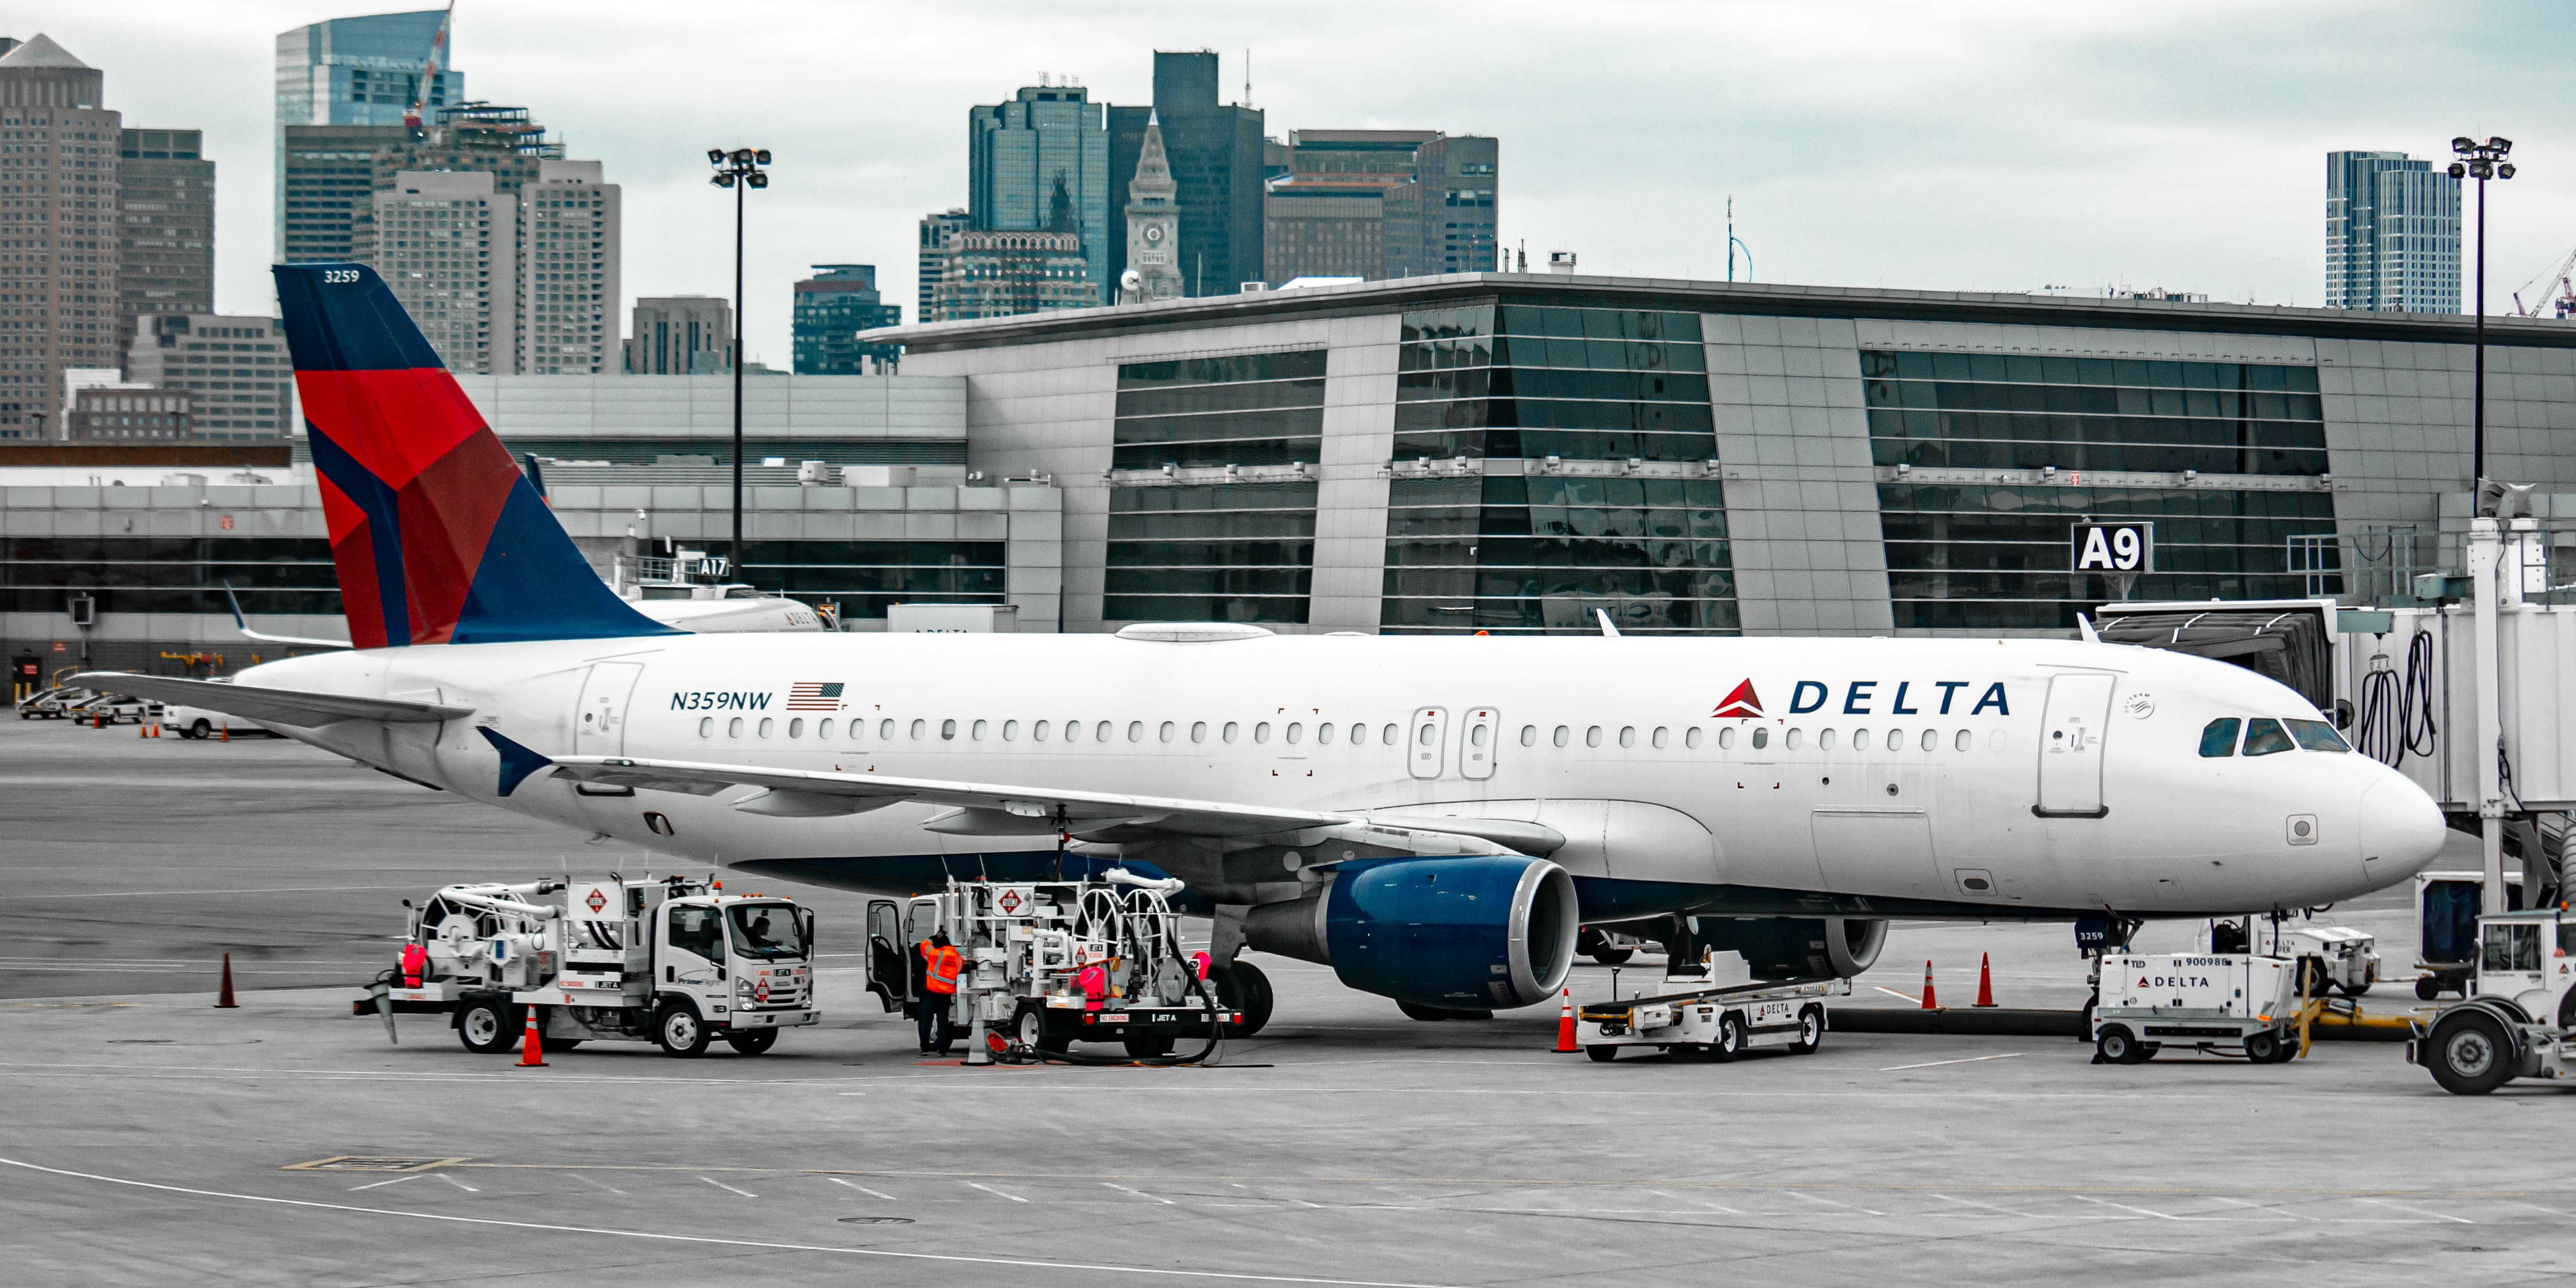 Delta Passengers Stranded on Remote Island: A Tale of Survival and Gratitude